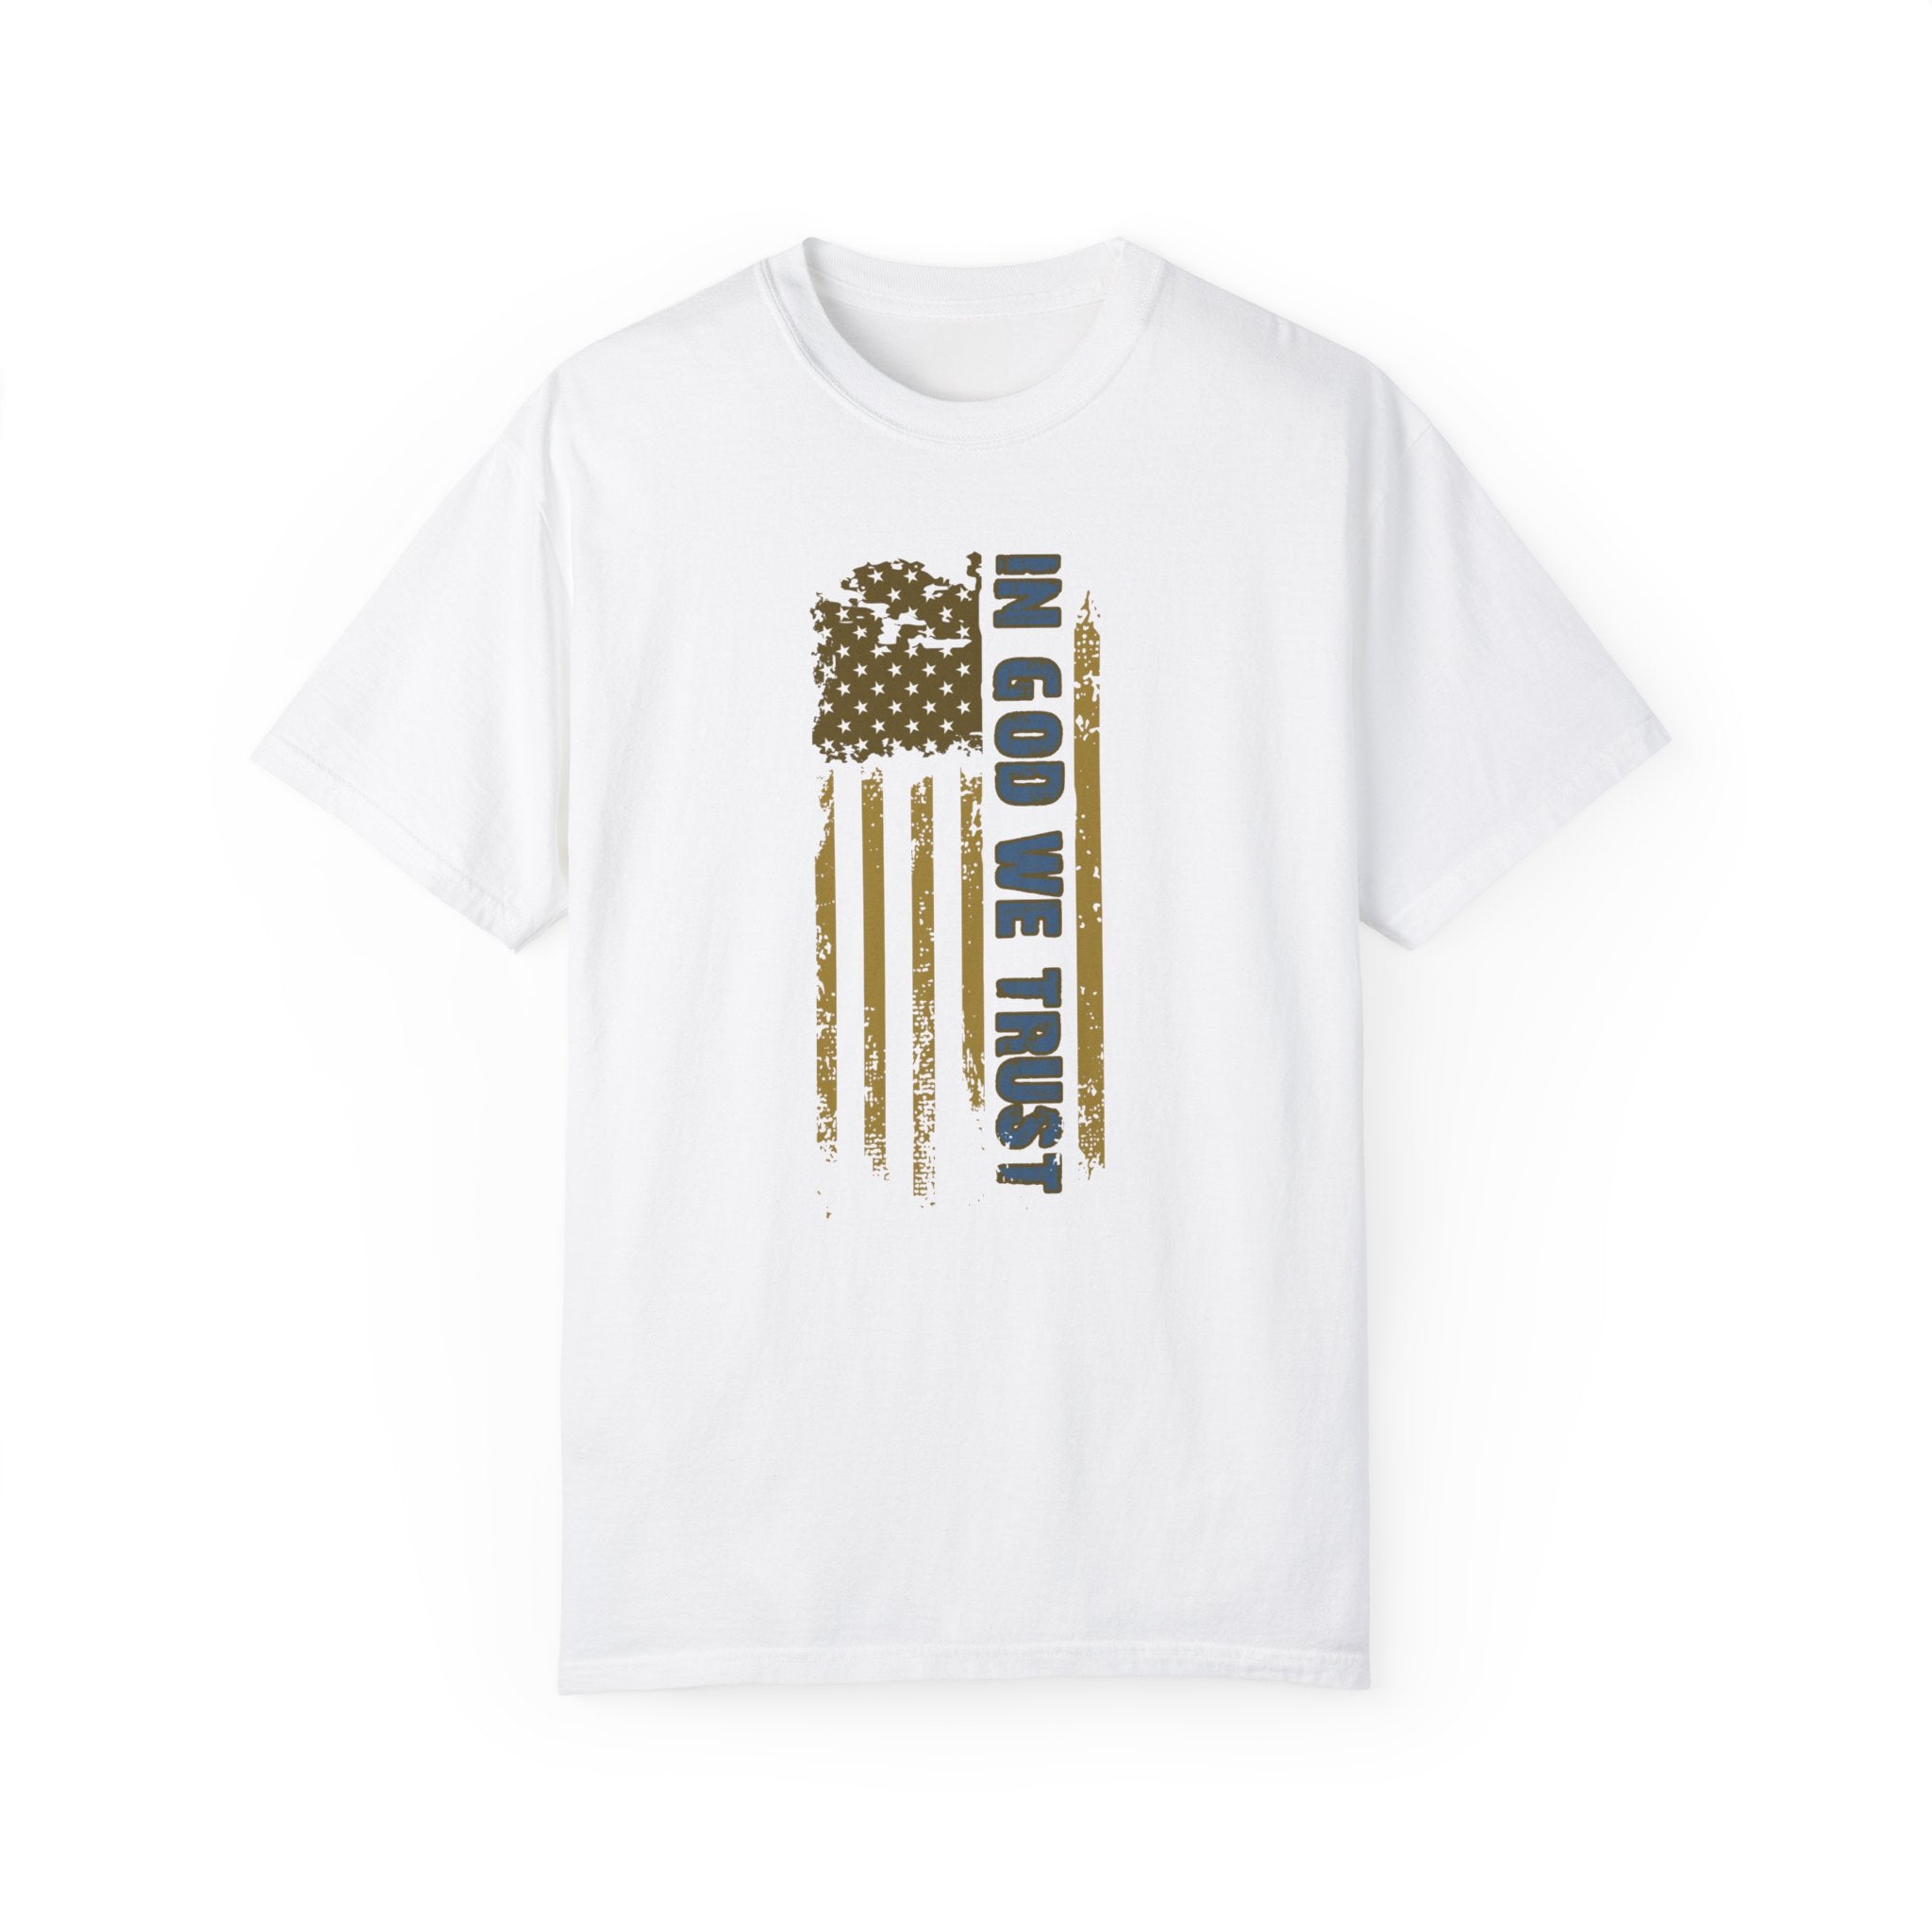 Faded Glory: In God We Trust Comfort Colors Garment-Dyed T-shirt - Encore2woWhiteS